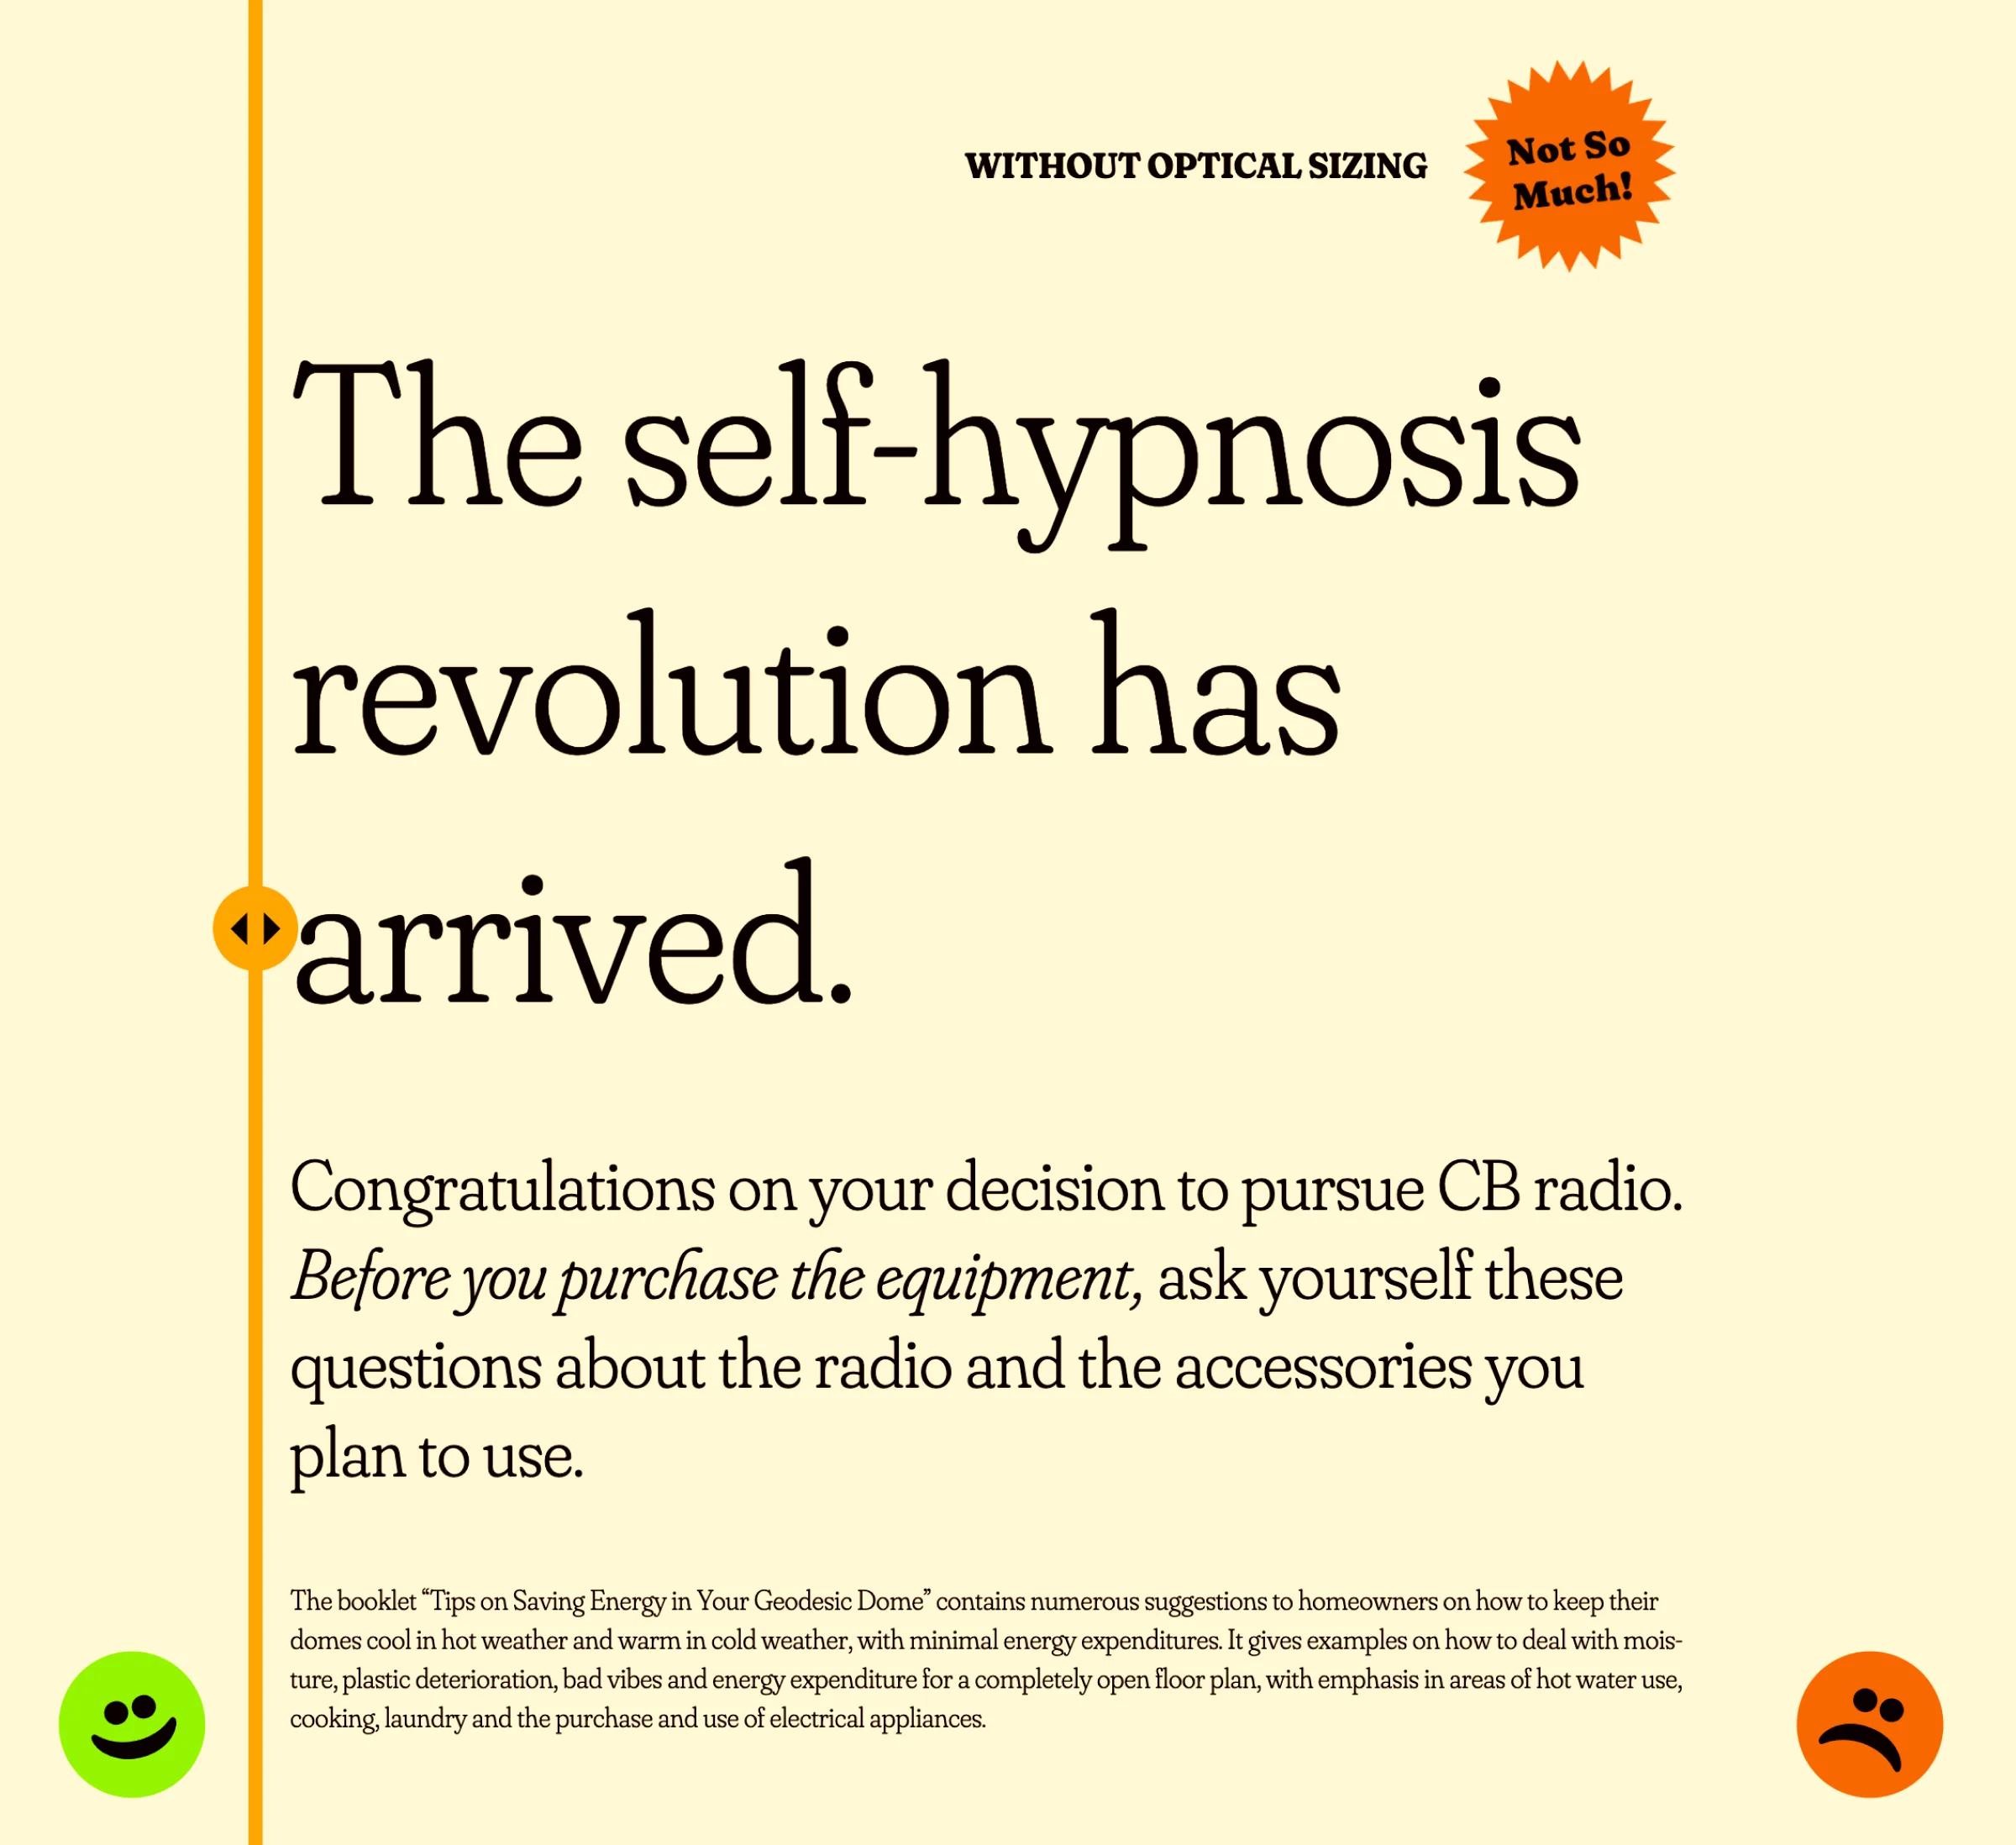 Text about self-hypnosis and radio purchase in 3 text sizes